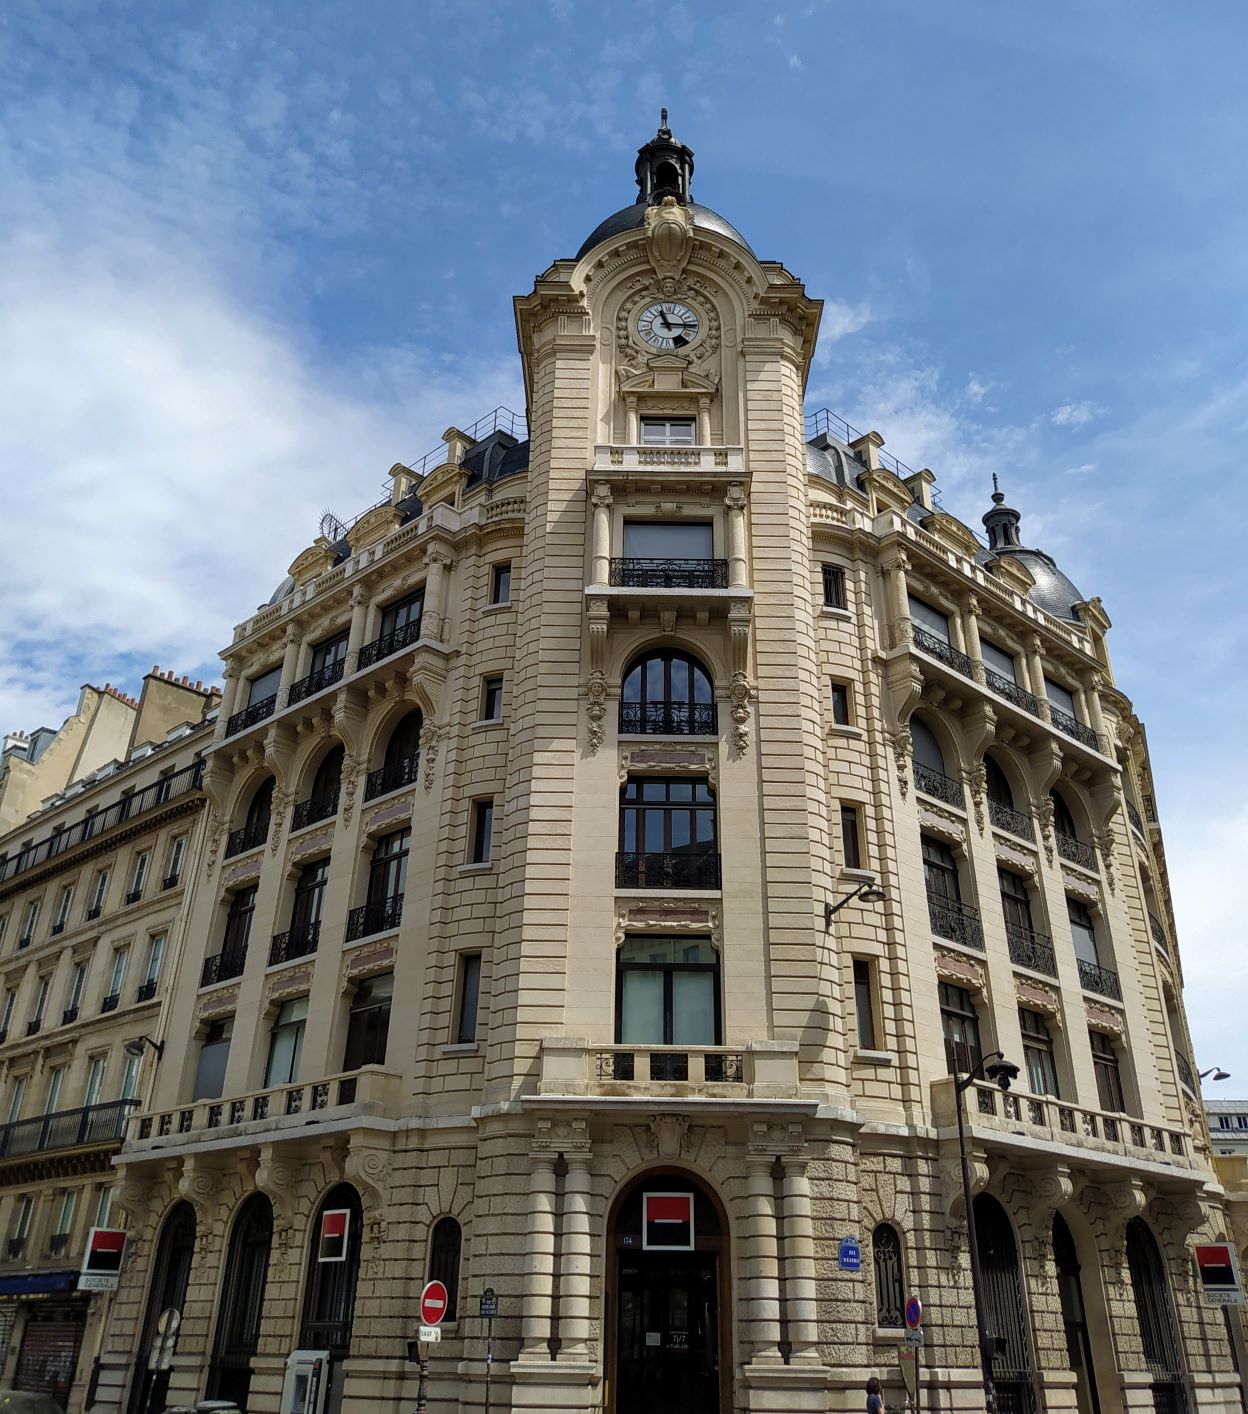 Corner terrace building with Société Générale logo showing on ground floor. A tower on the corner features a dome, with a clock at the top